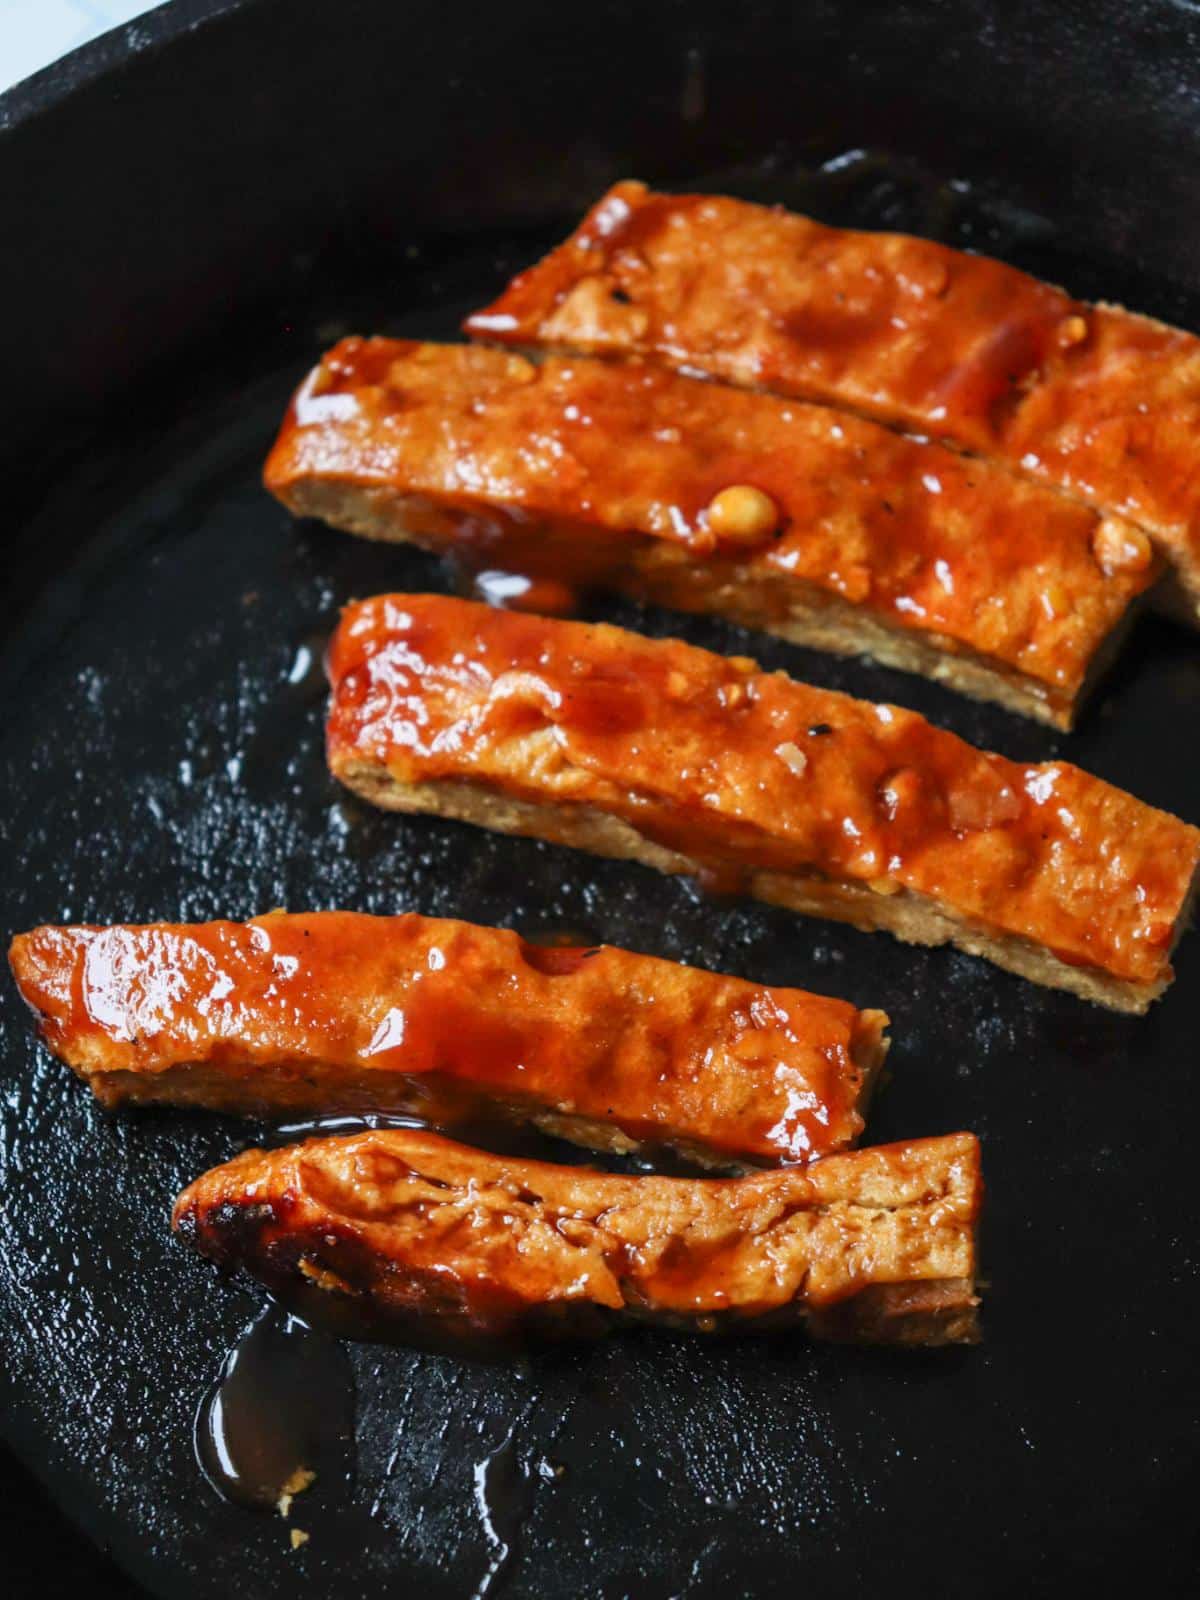 Vegan ribs grilling in a grill pan with bbq sauce.